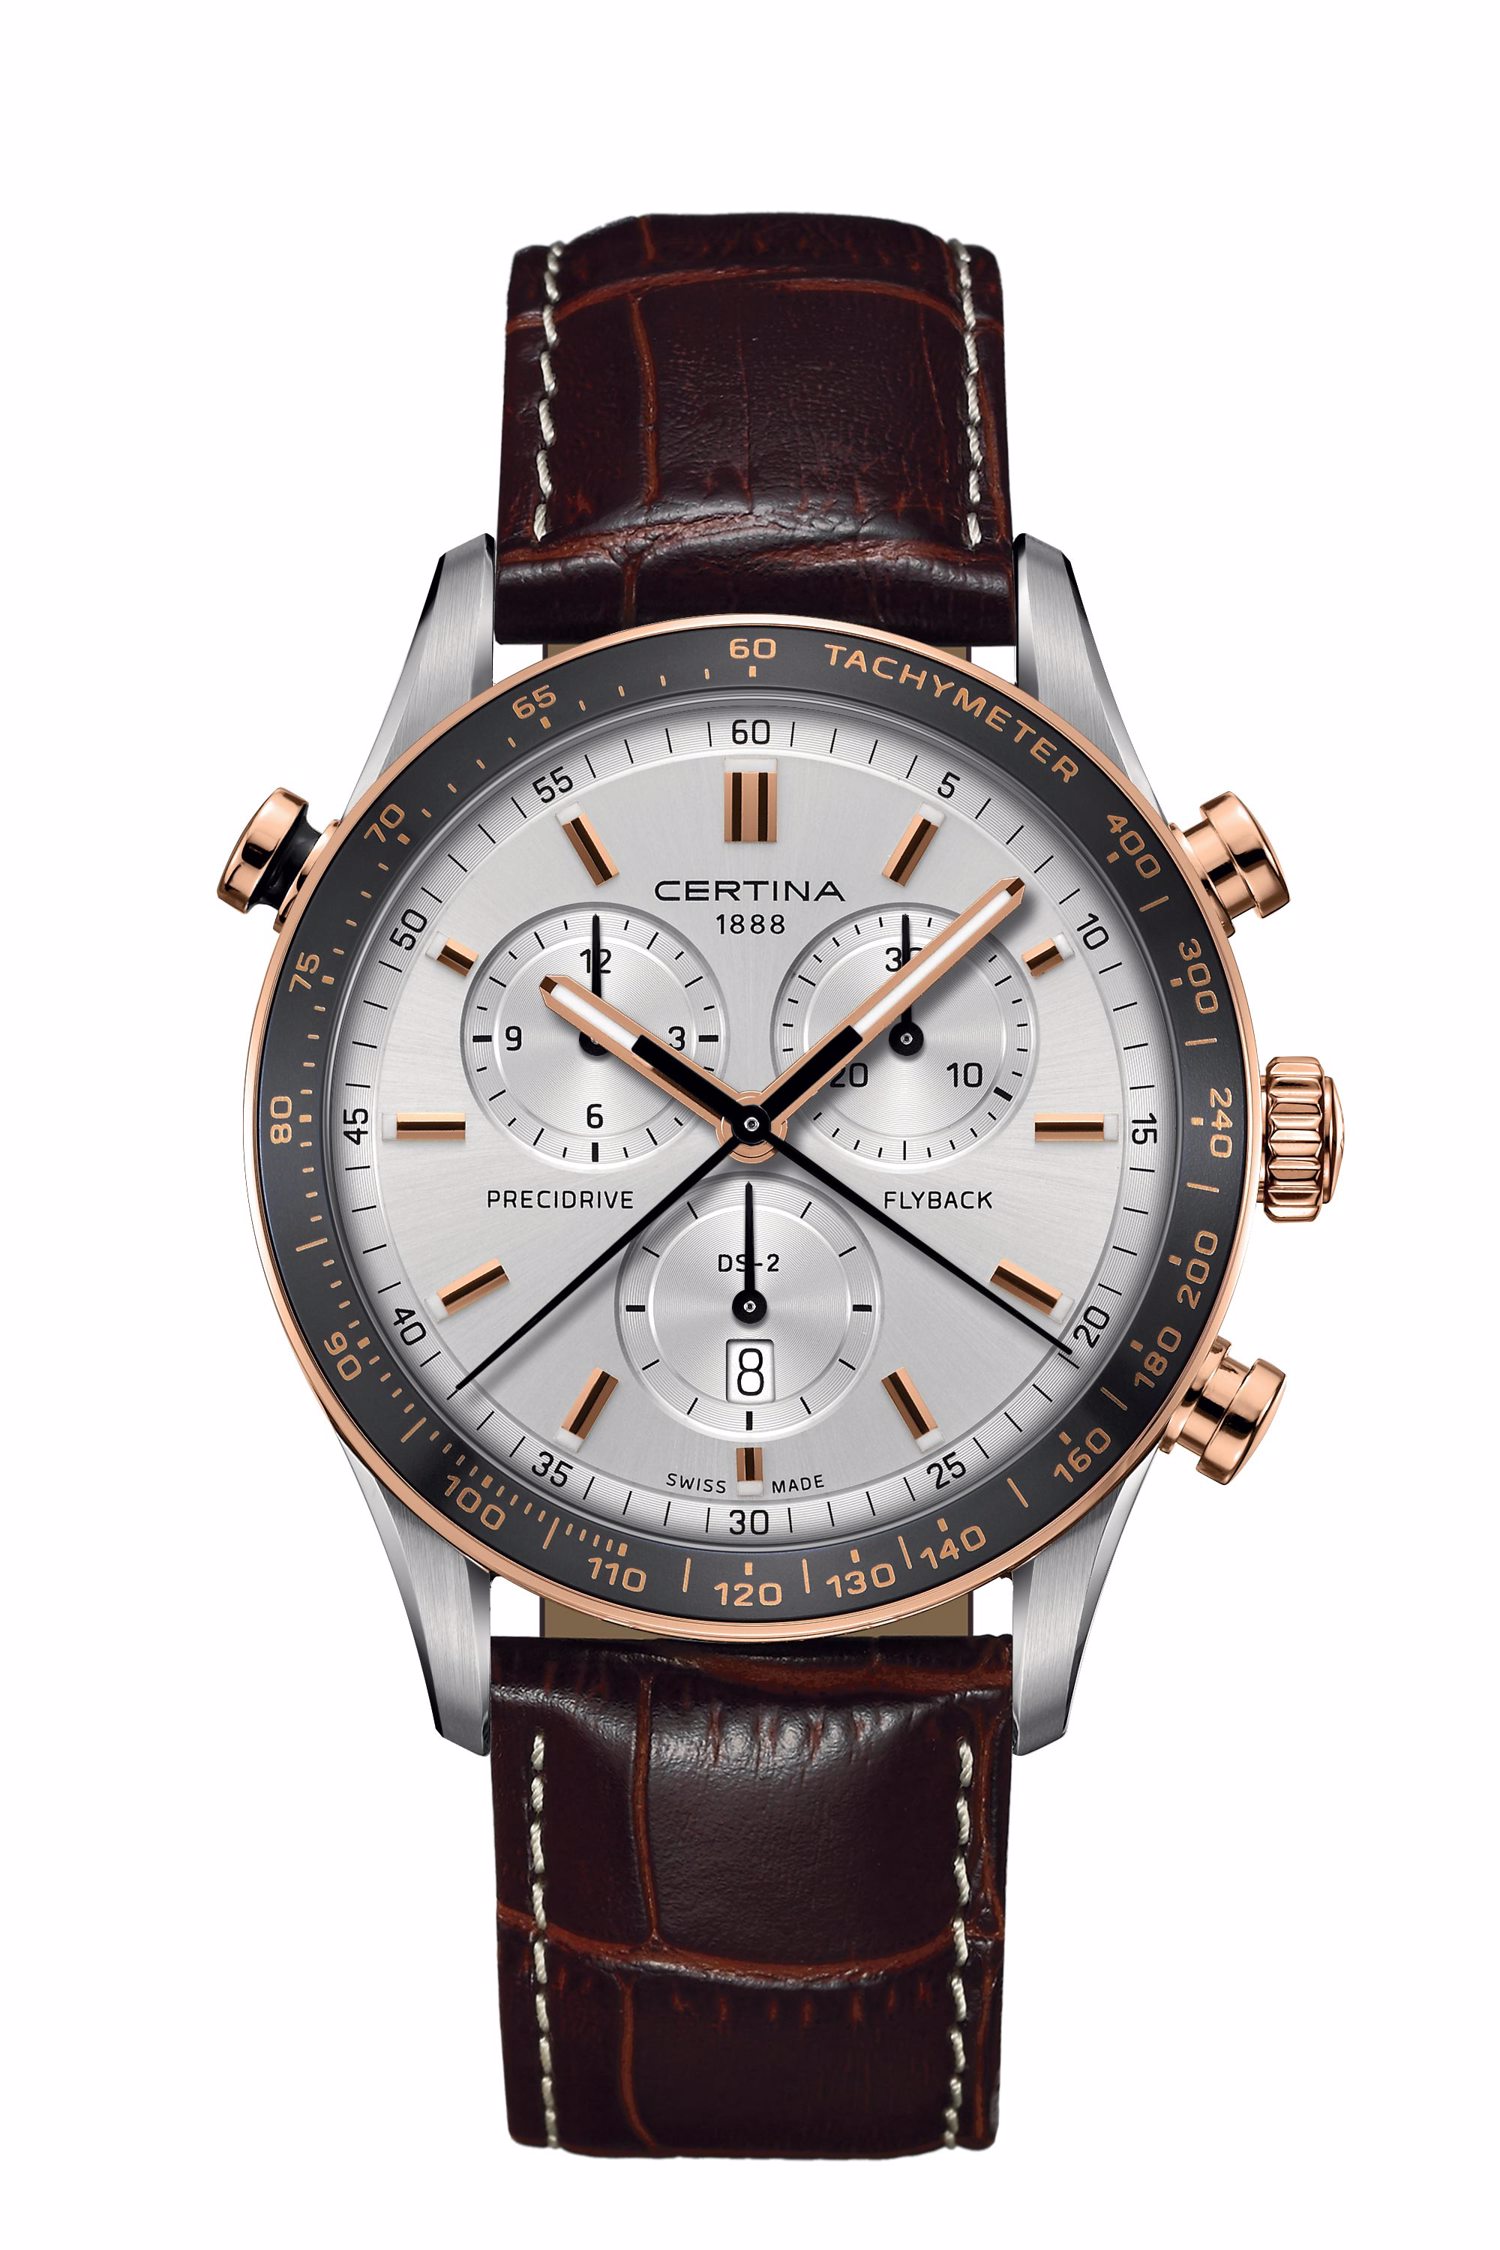 Chronograph Certina DS-2 Flyback